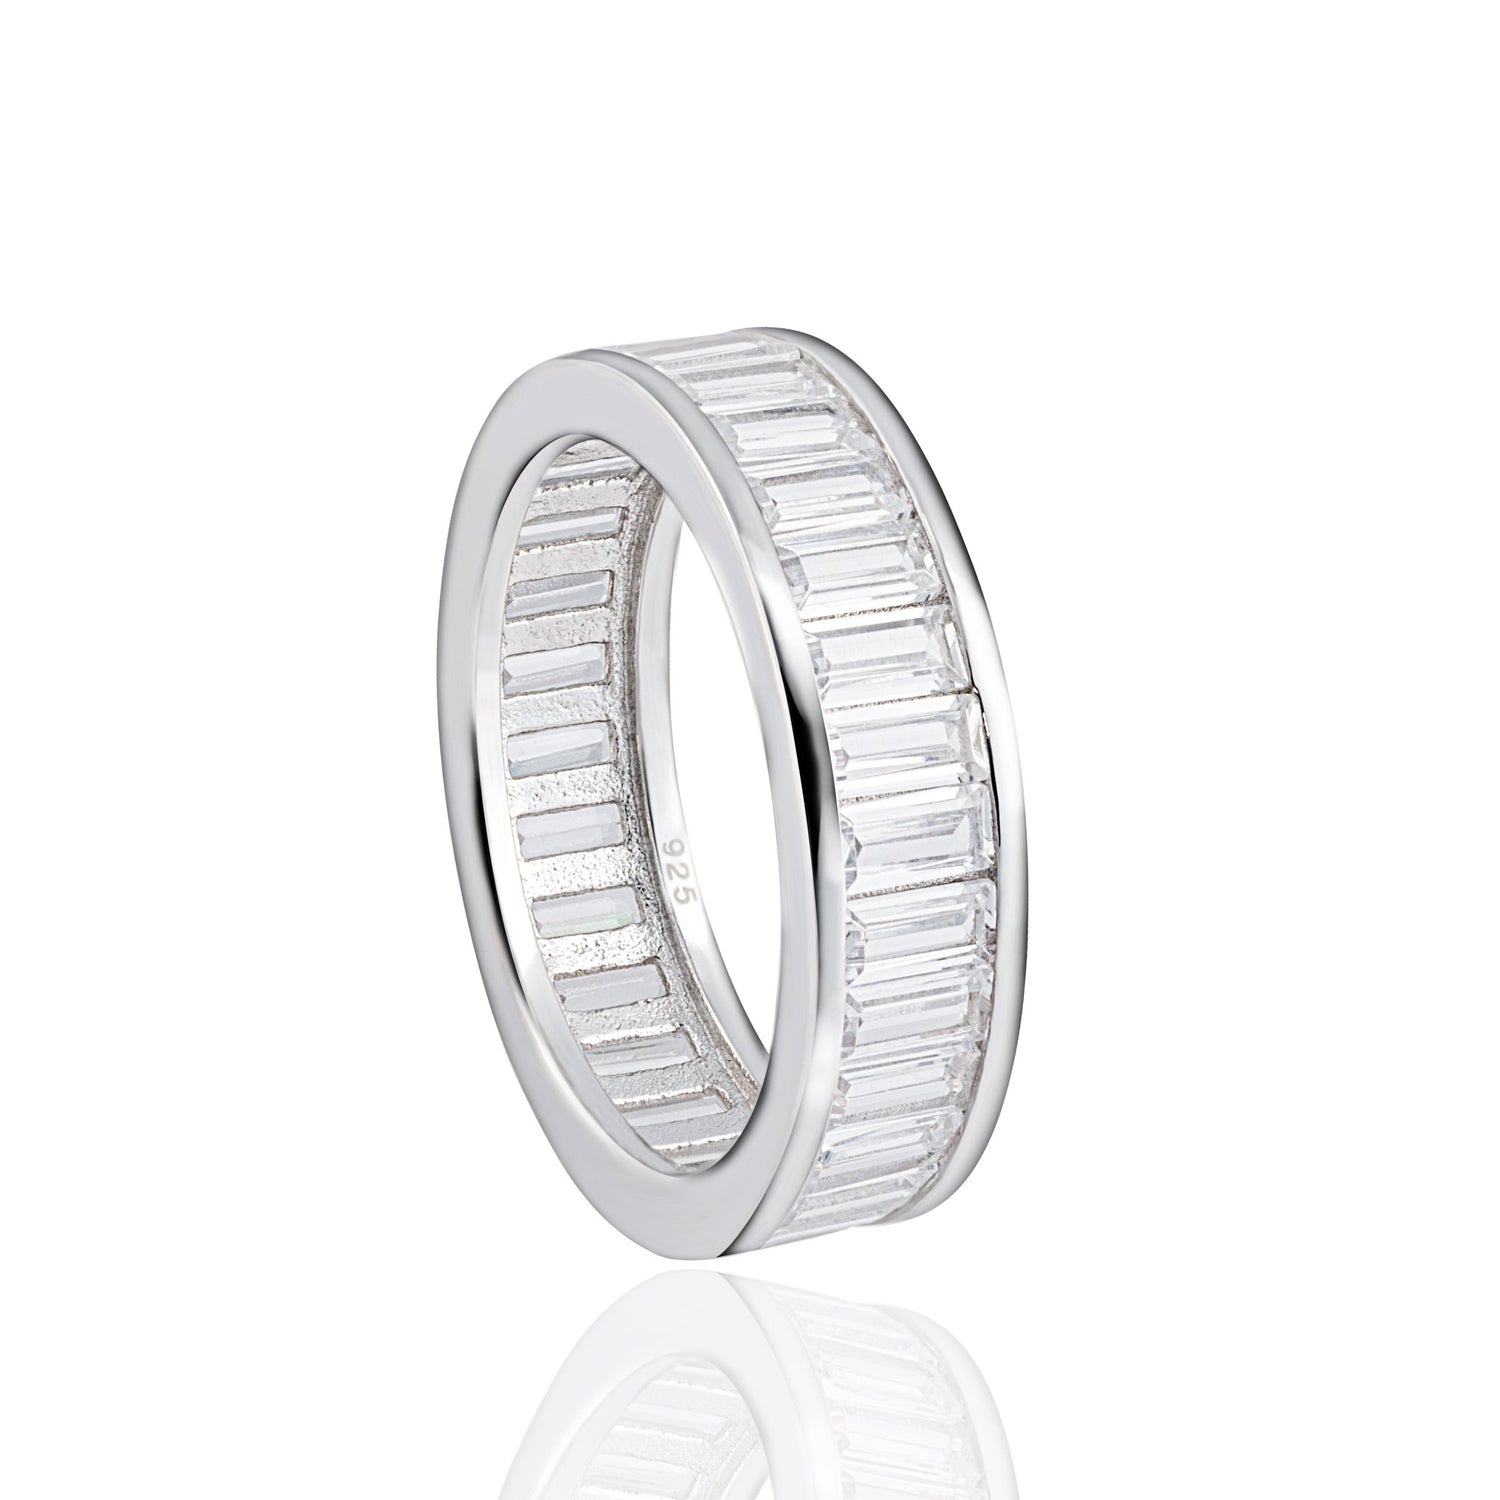 The Silver Baguette Ring